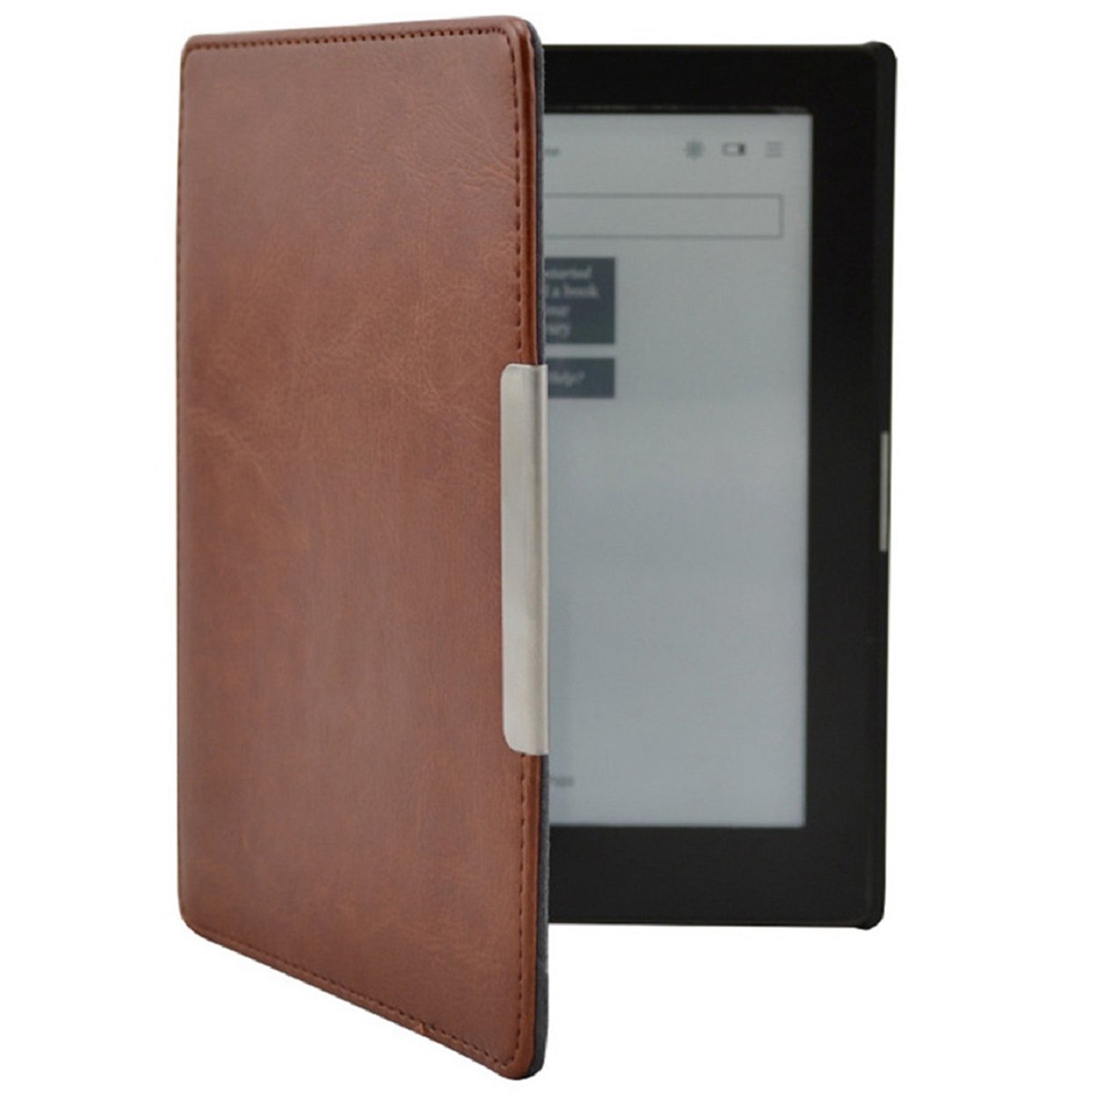 Ultra thin slim PU leather Case for kobo aura(non HD)6.0 inche Reader Magnetic Smart Case Shell and Cover